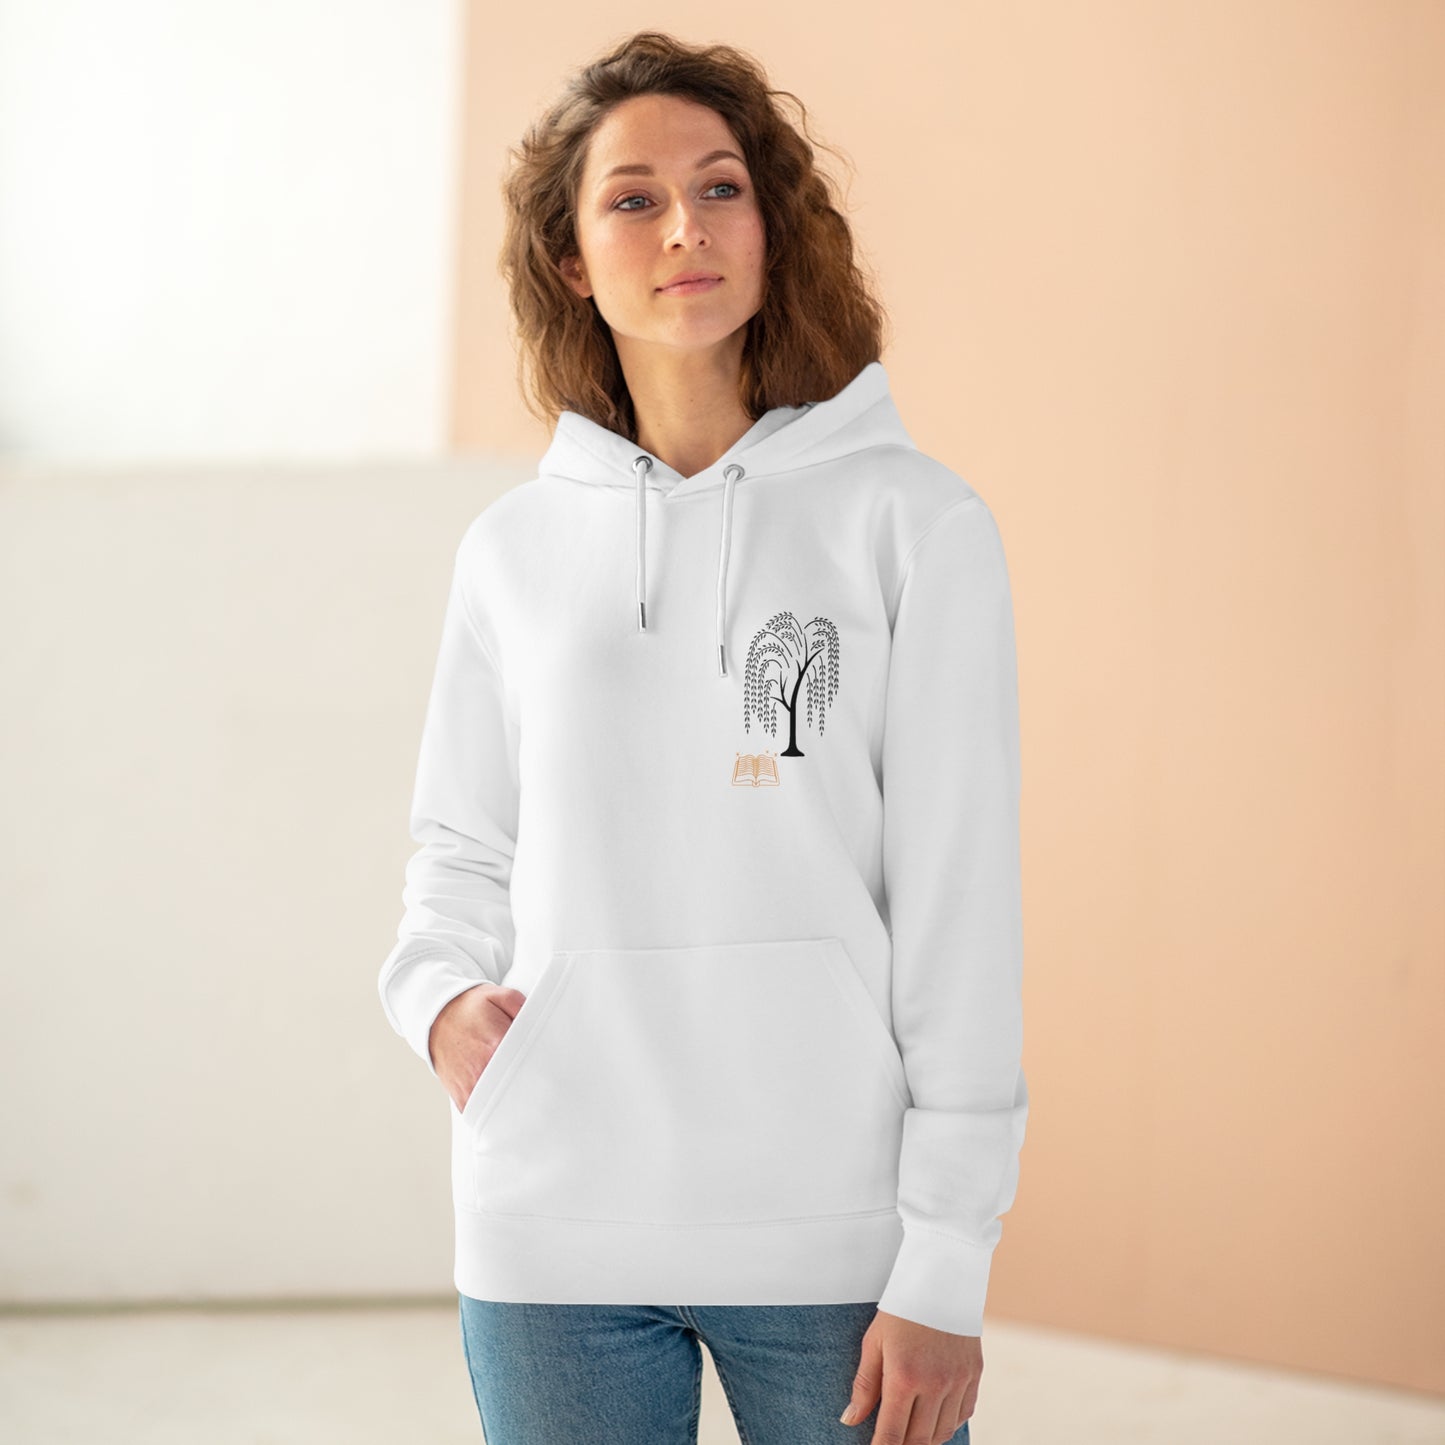 Original Design Love of Reading Under the Willow Tree Hoodies Made in USA